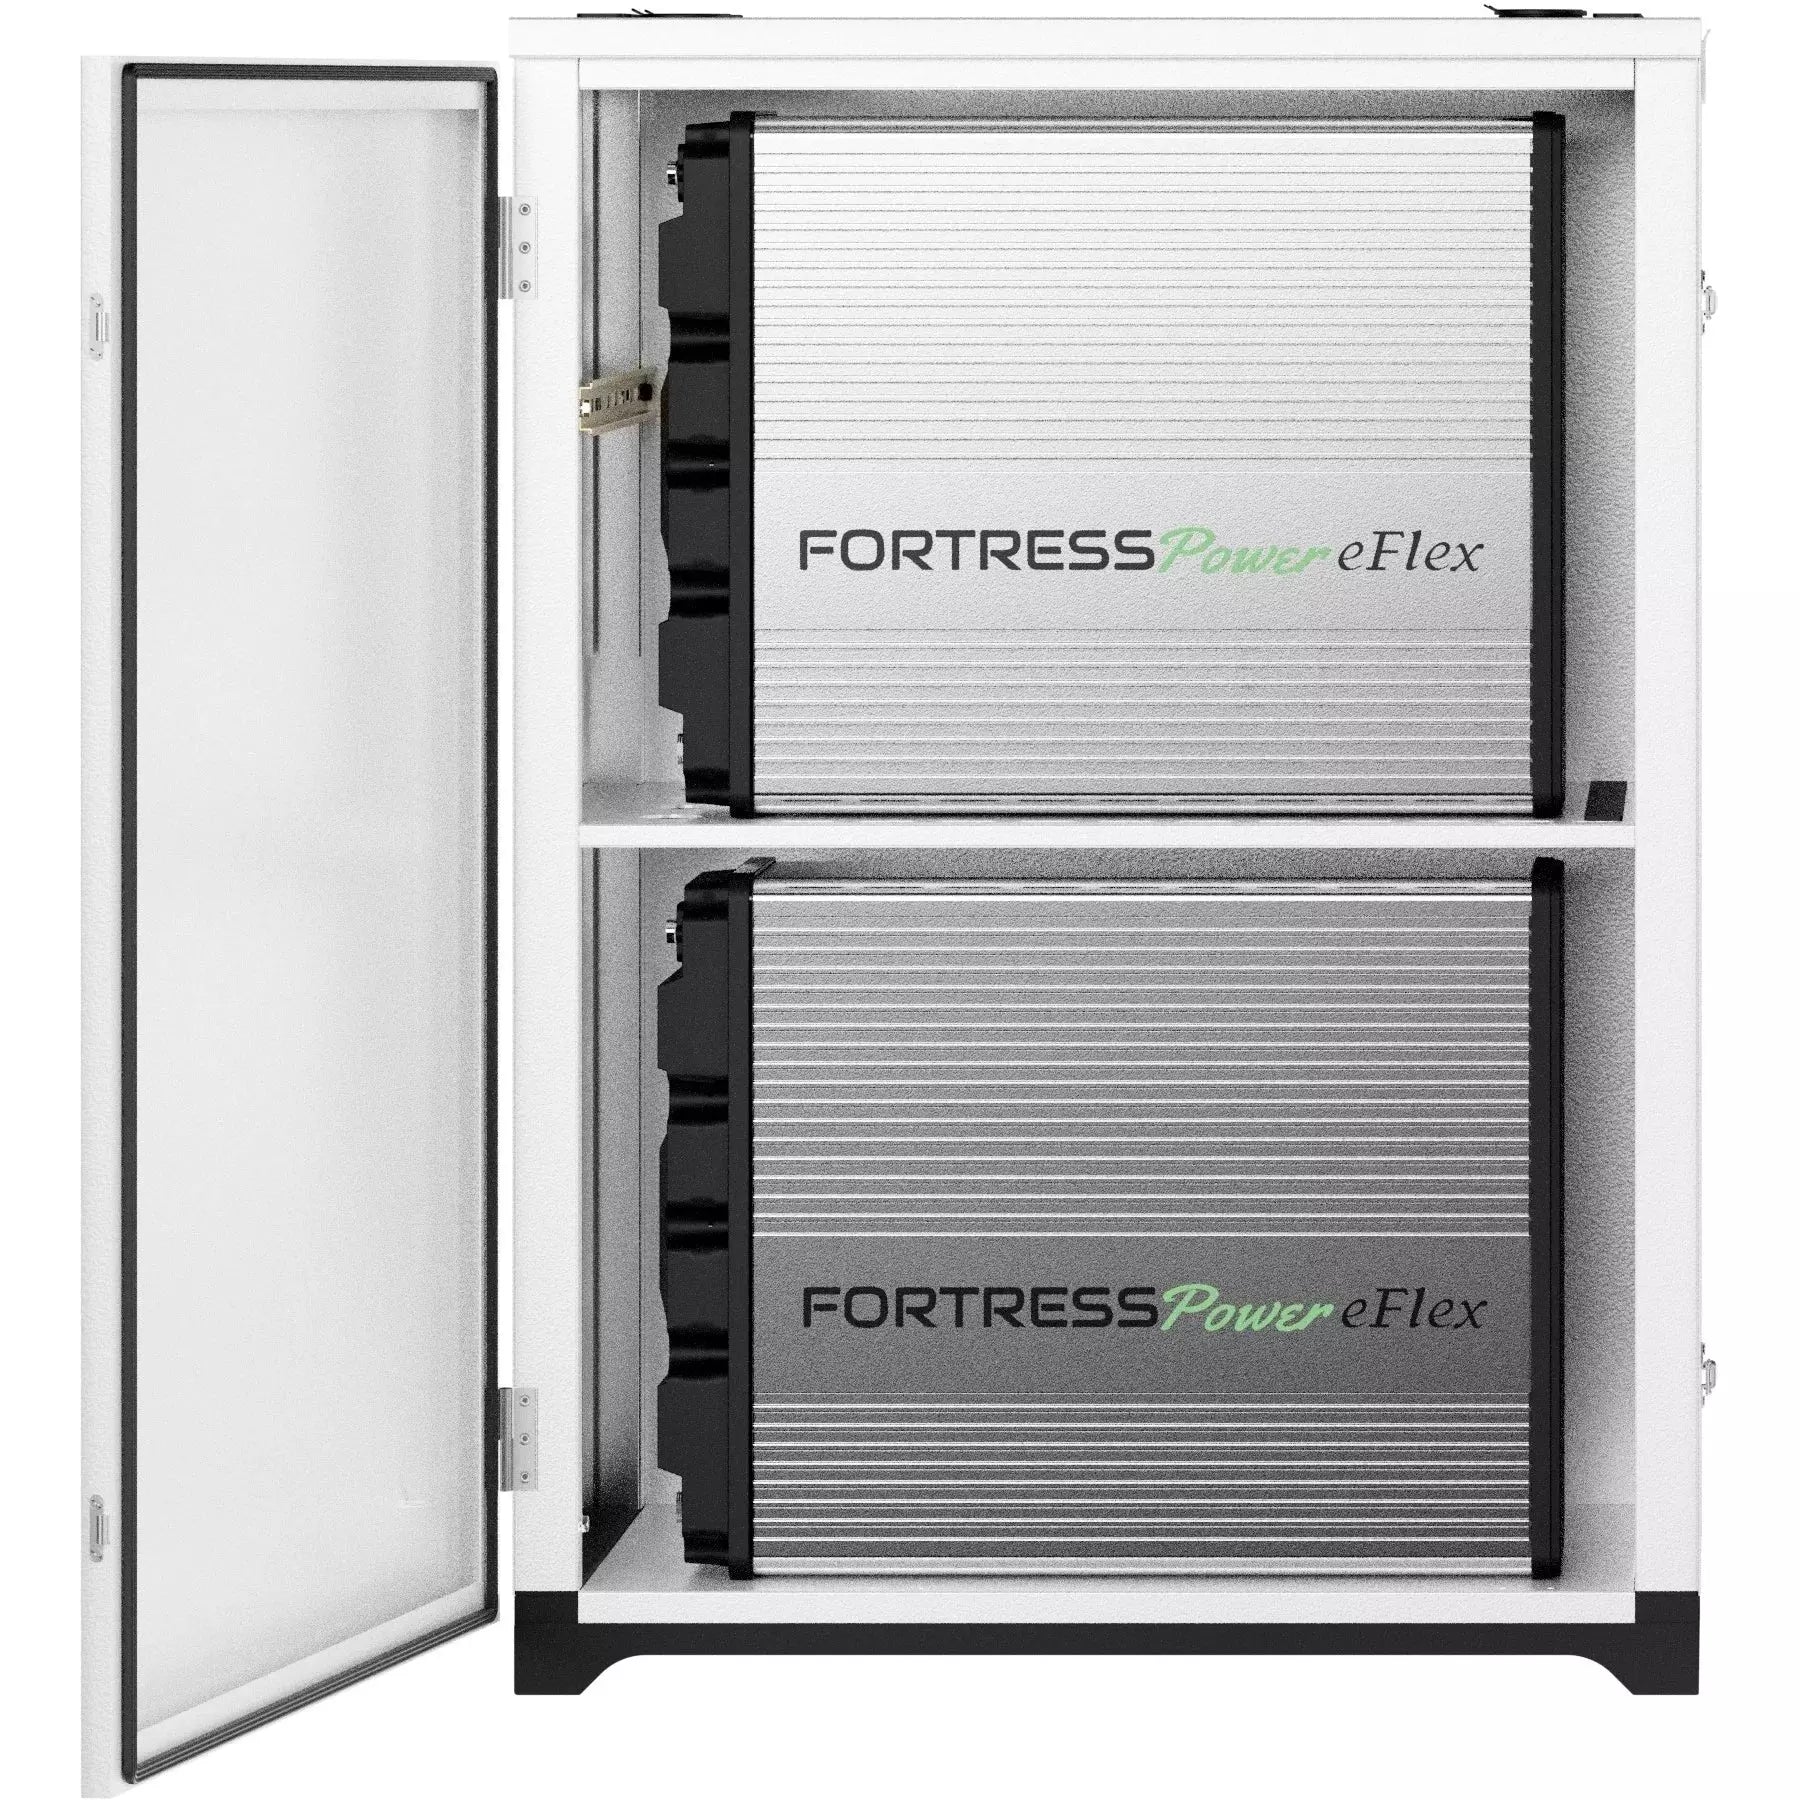 Fortress Power FlexTower Without Inverter - 3 eFlex Units, IP65 Outdoor Rated Inverter Enclosure with Built-in Active Cooling Fan; Durarack with 3 eFlex Units, Inverter Not Included.